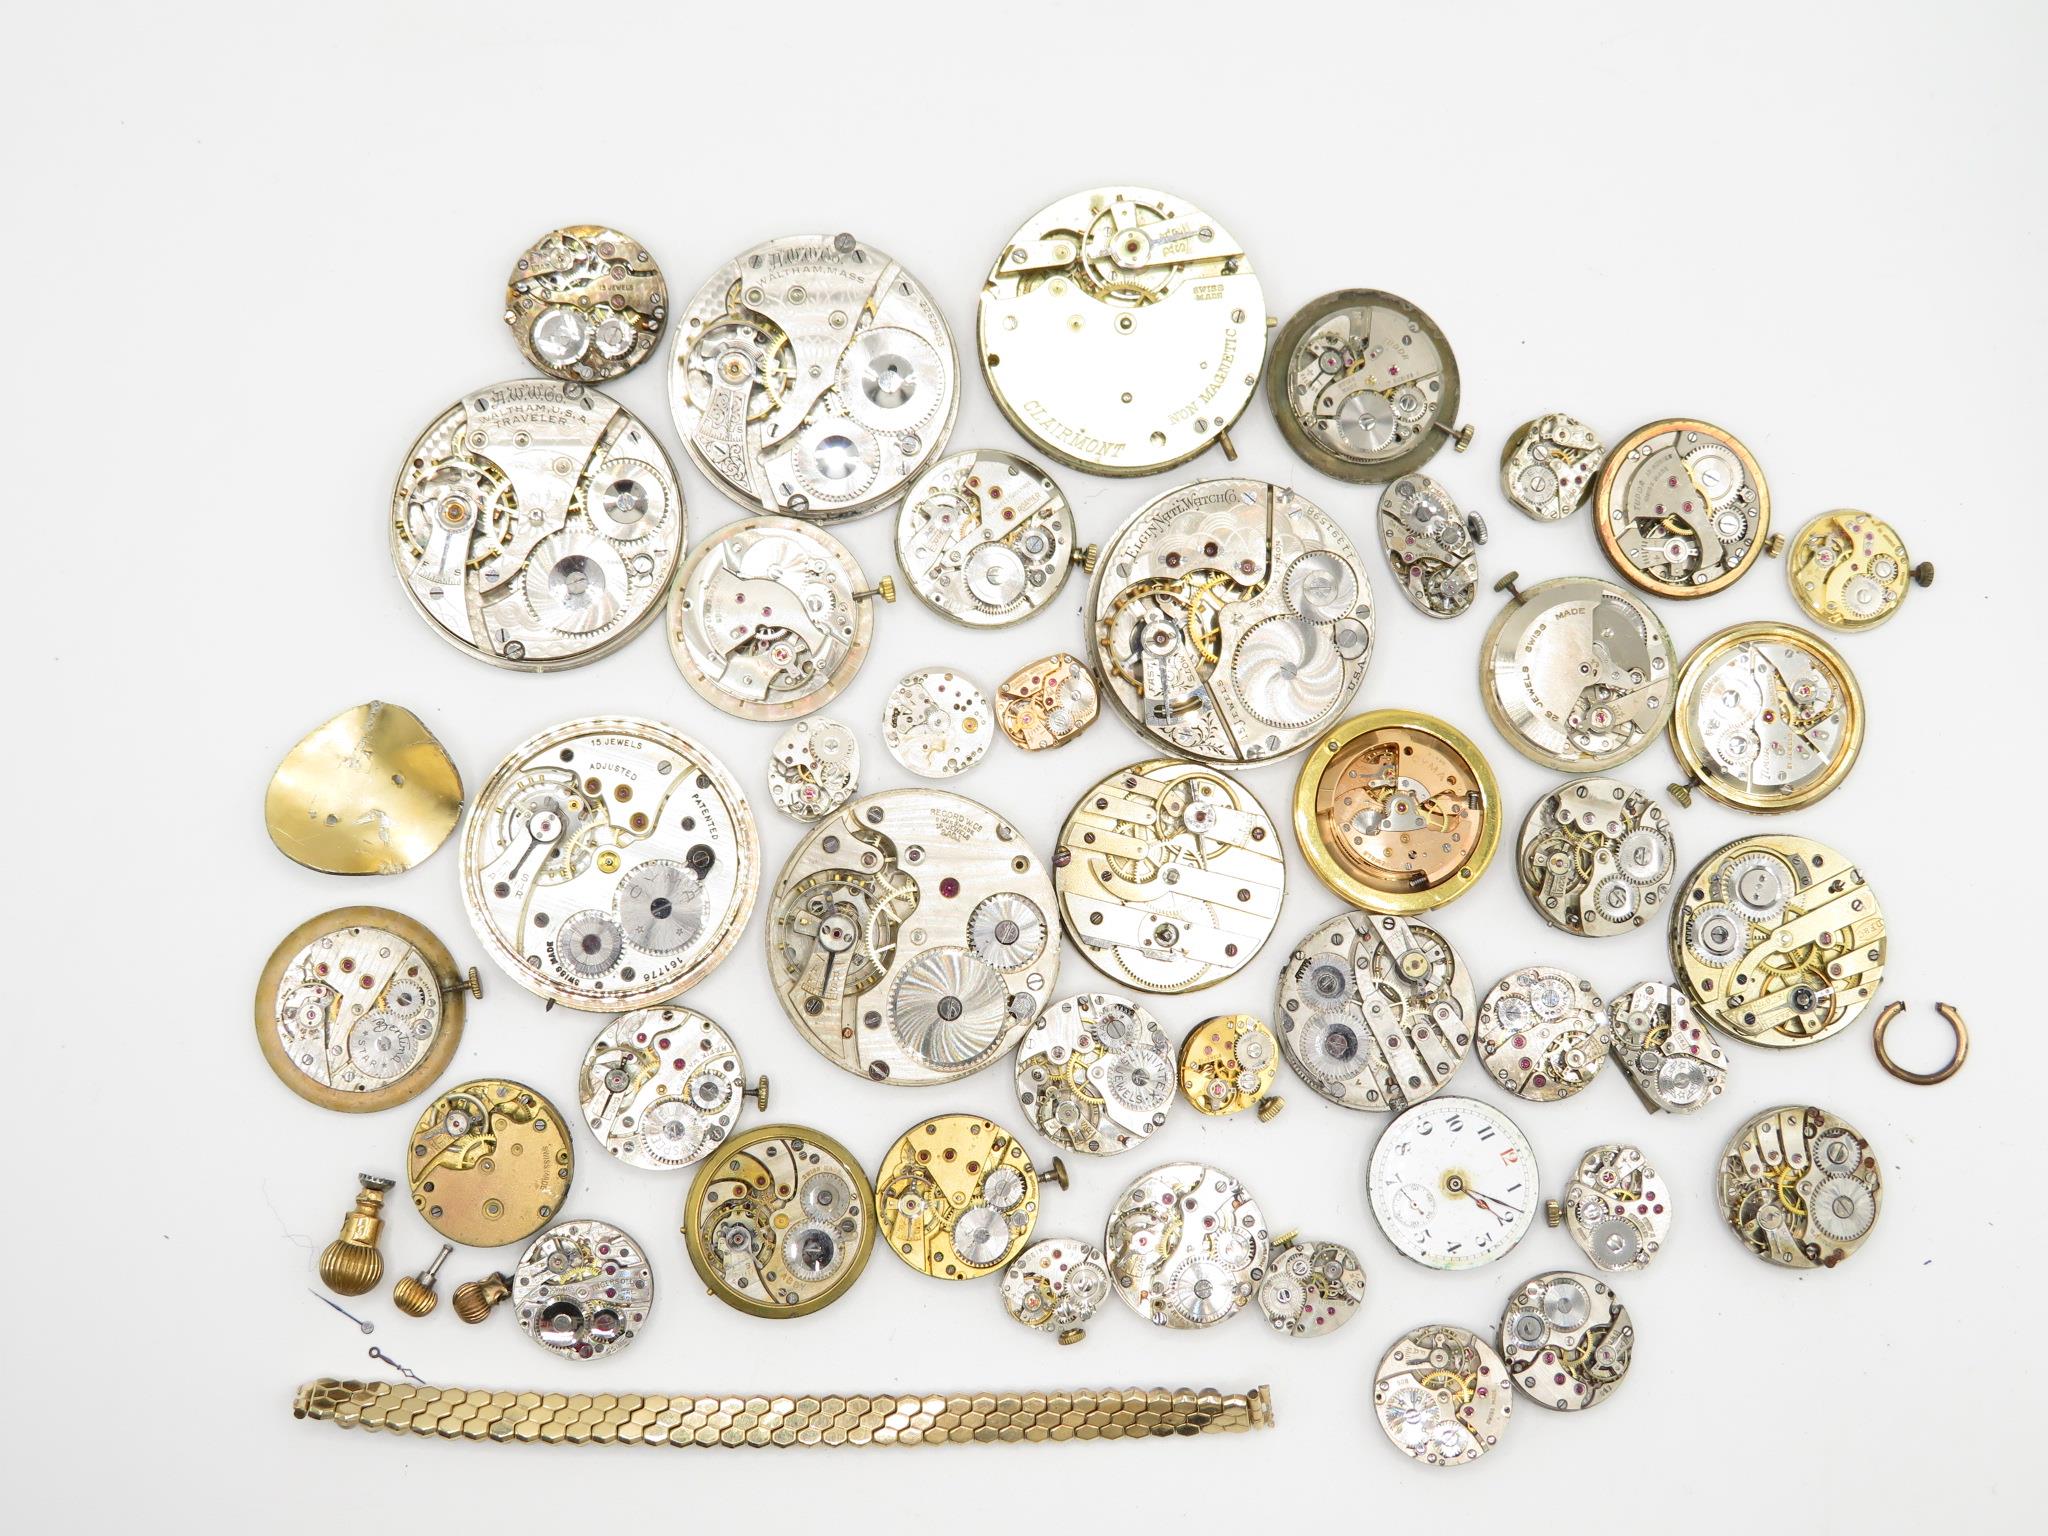 Bag of pocket watch and wristwatch movements 632g - Image 6 of 11